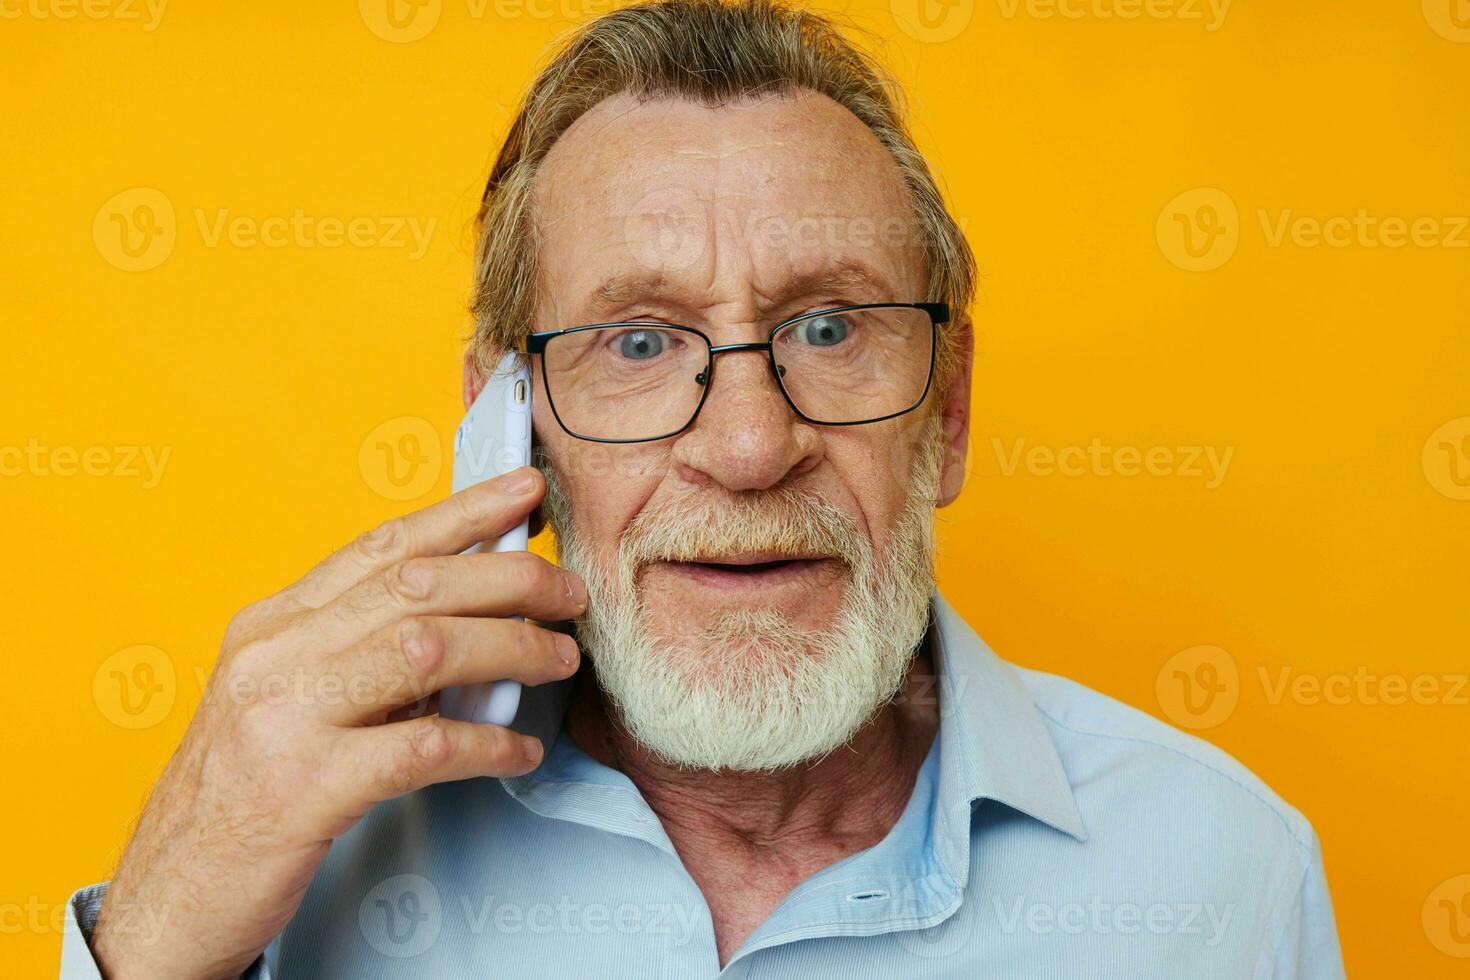 elderly man talking on the phone posing close-up cropped view photo